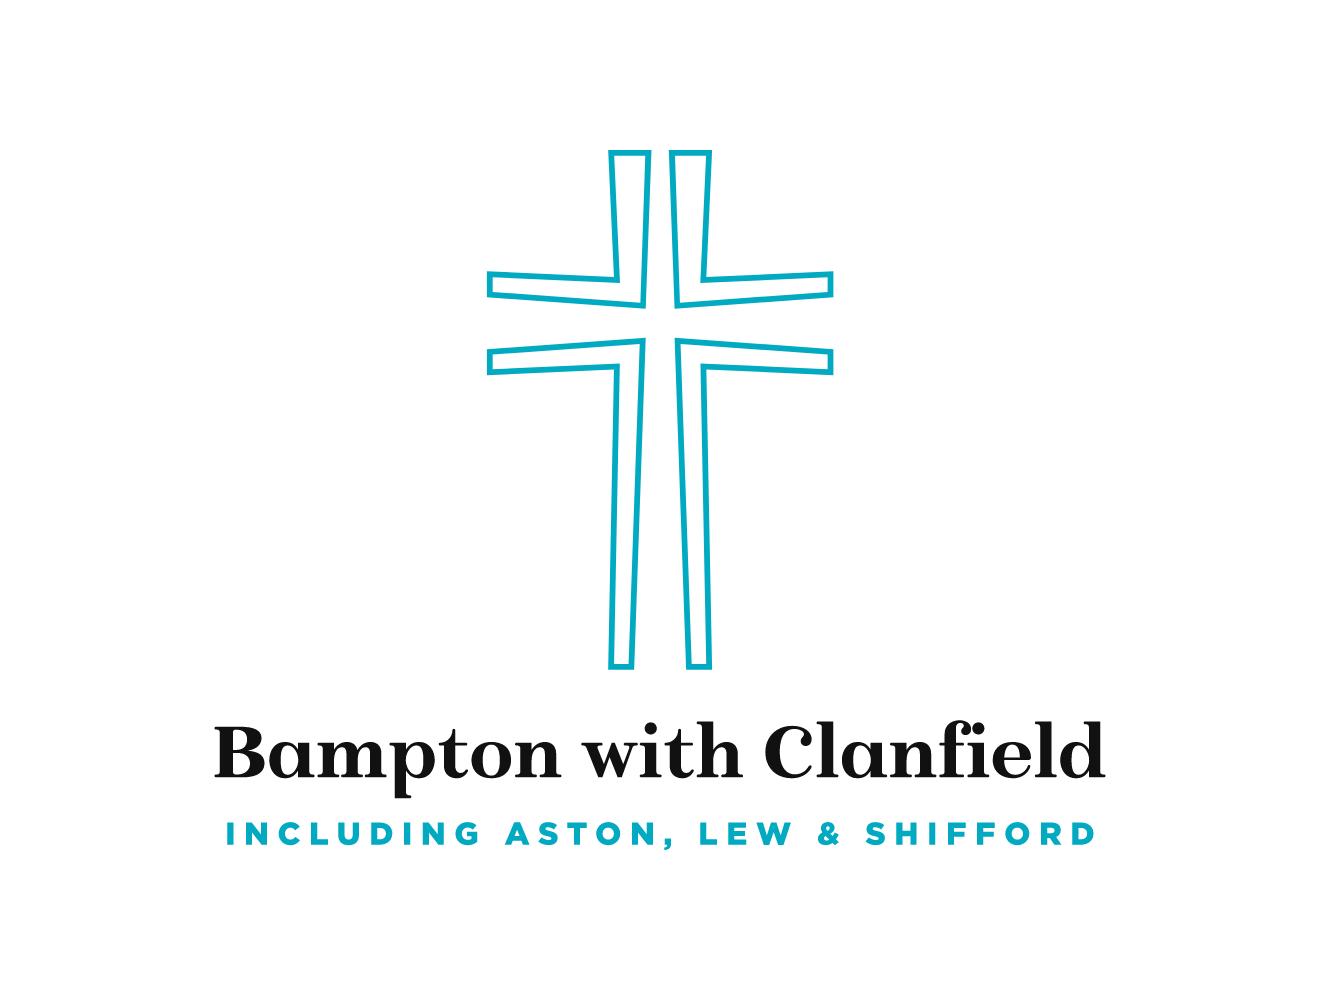 Bampton with Clanfield